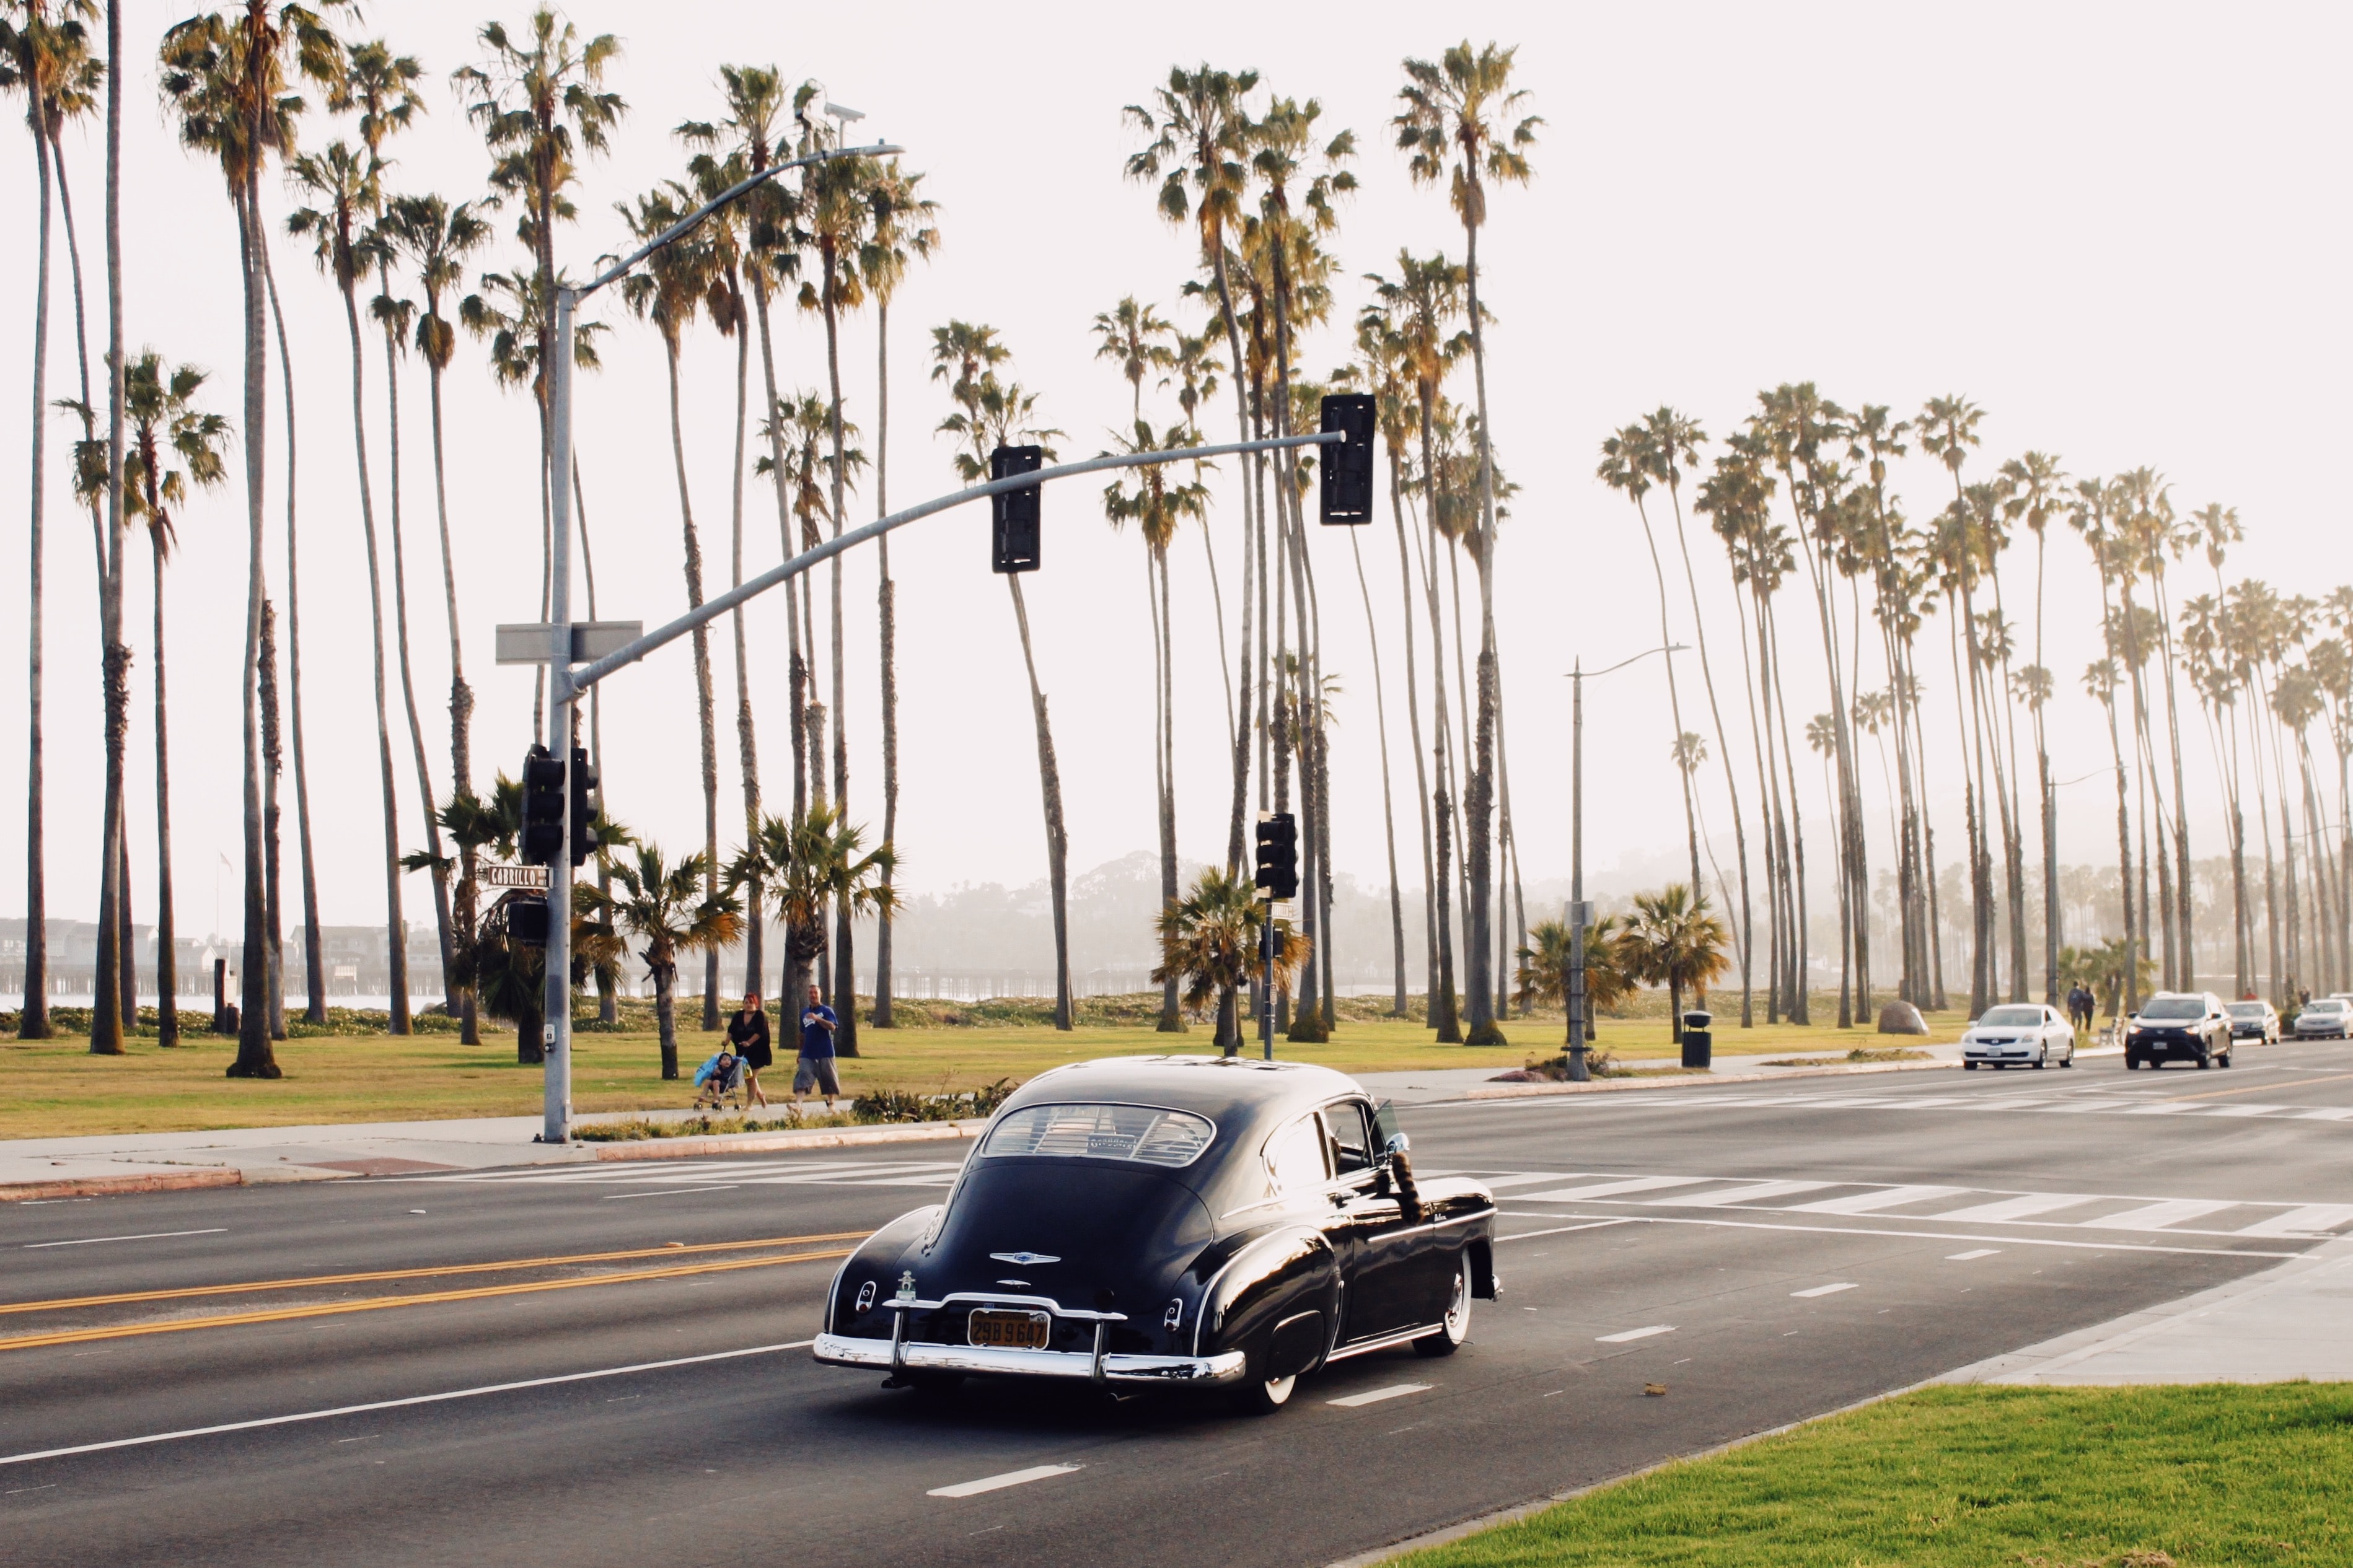 An old-fashioned car drives down a street alongside palm trees and a beach.